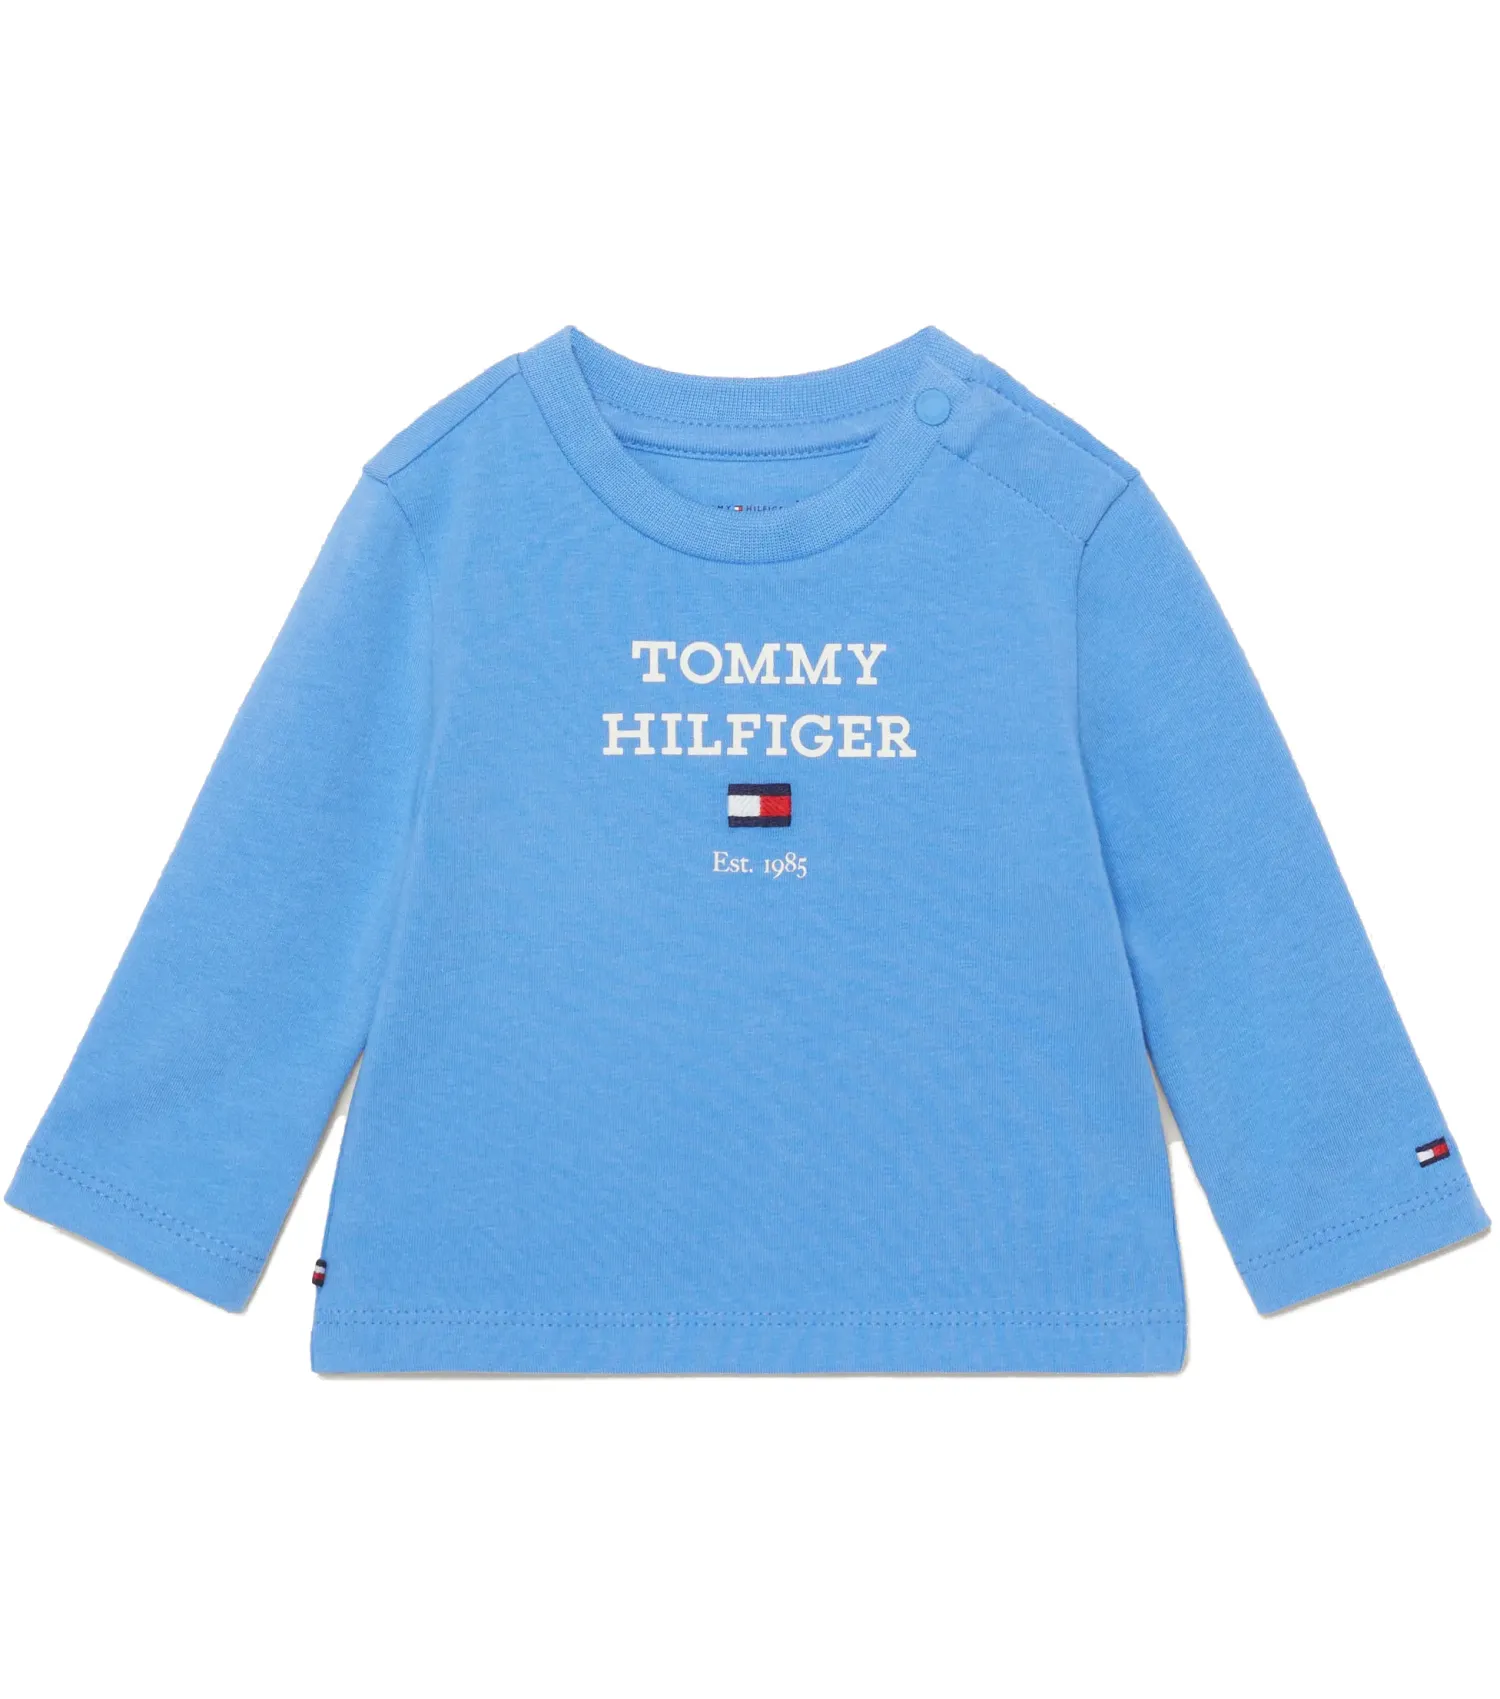 TOMMY HILFIGER Baby TH Logo Long Sleeve T-shirt - Blue Spell |  Choice+Attitude